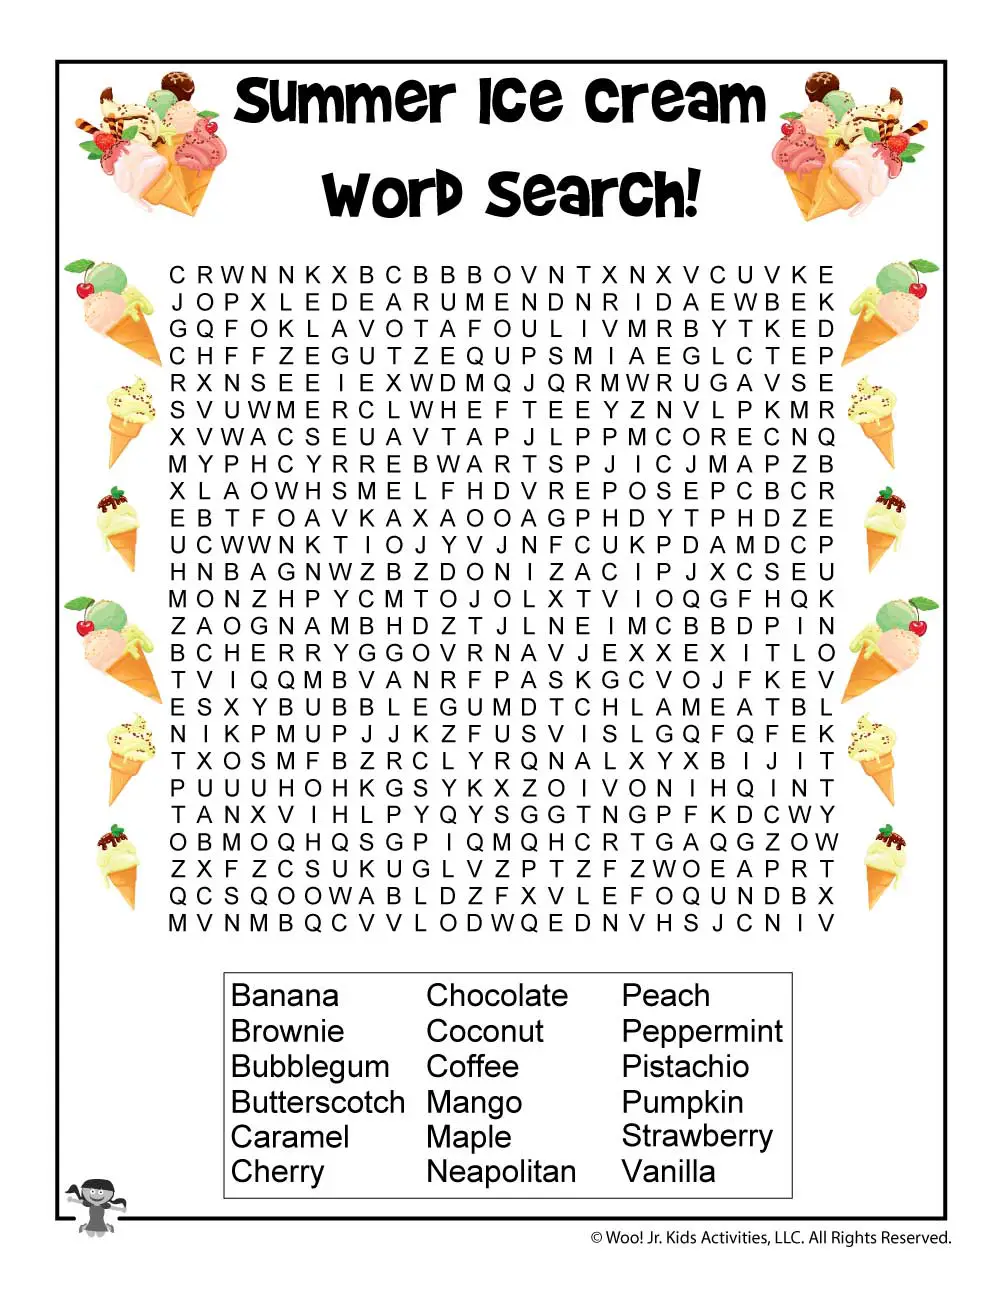 10-delicious-ice-cream-word-search-puzzles-kitty-baby-love